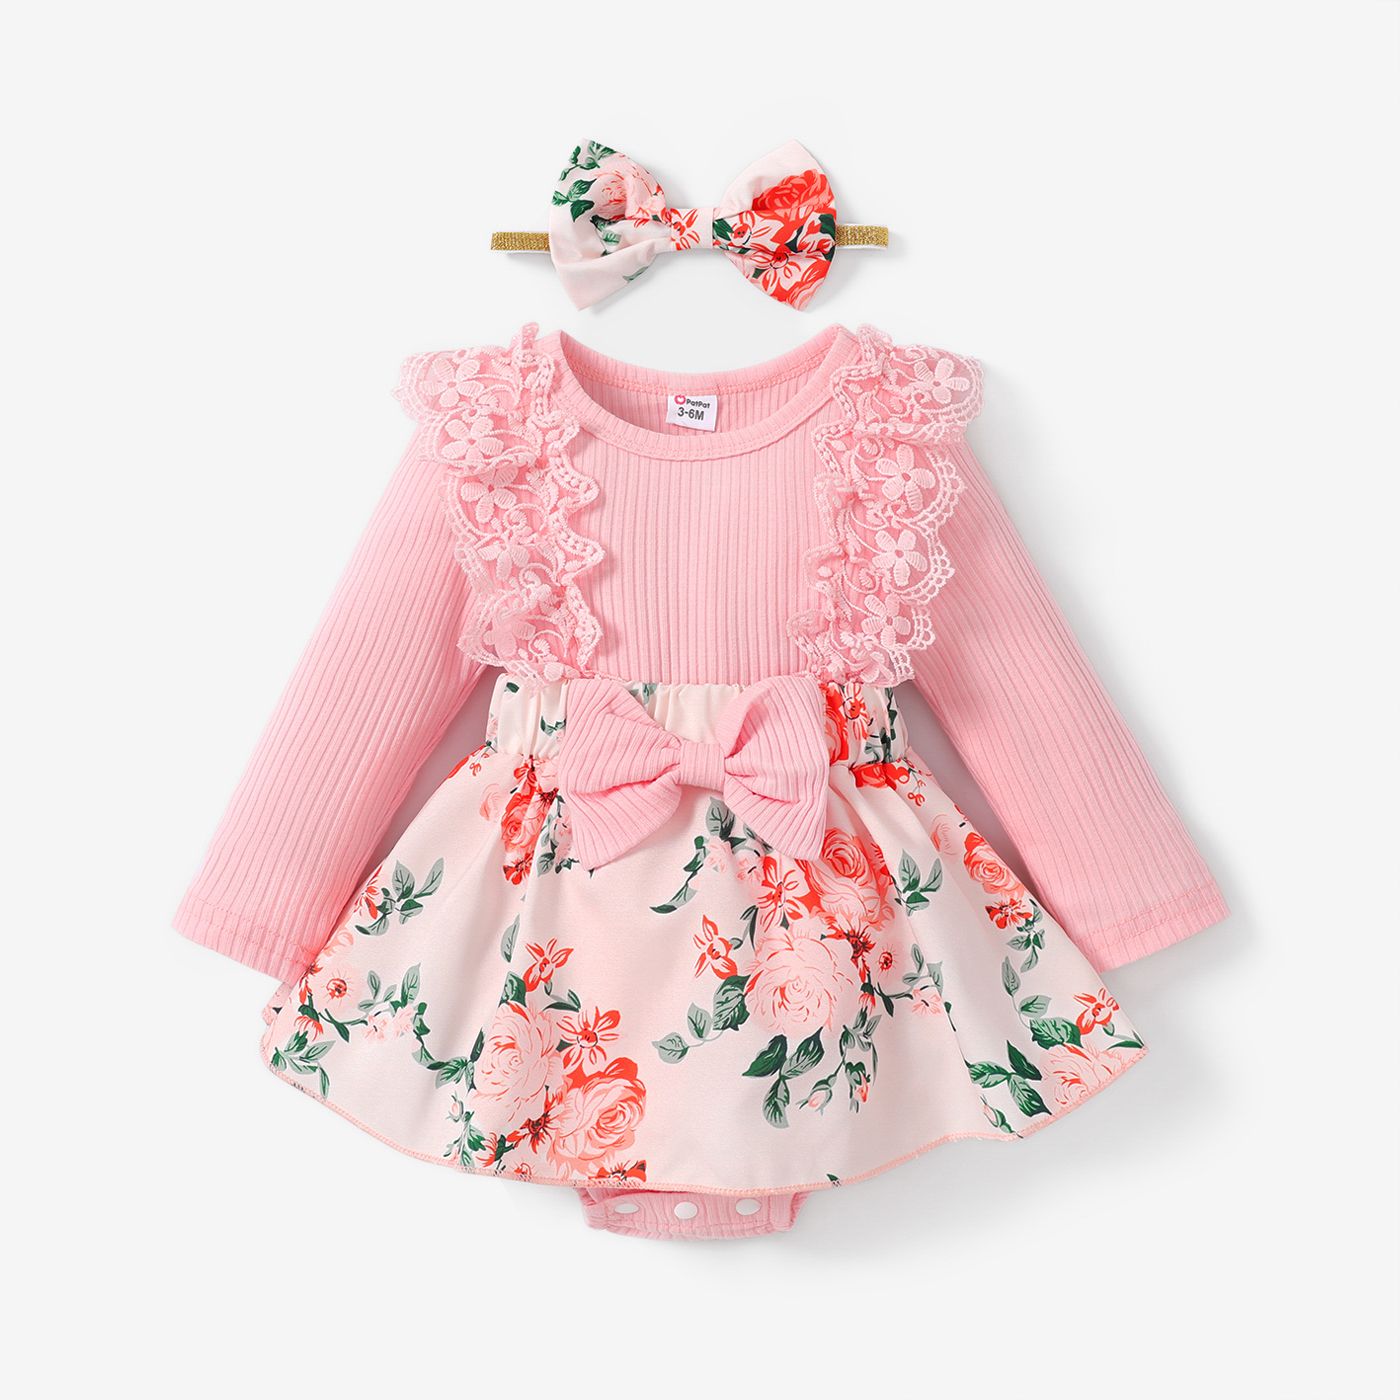 2pcs Baby Girl Long-sleeve Rib Knit Spliced Lace Ruffle Bow Front Floral Print Romper With Headband Set